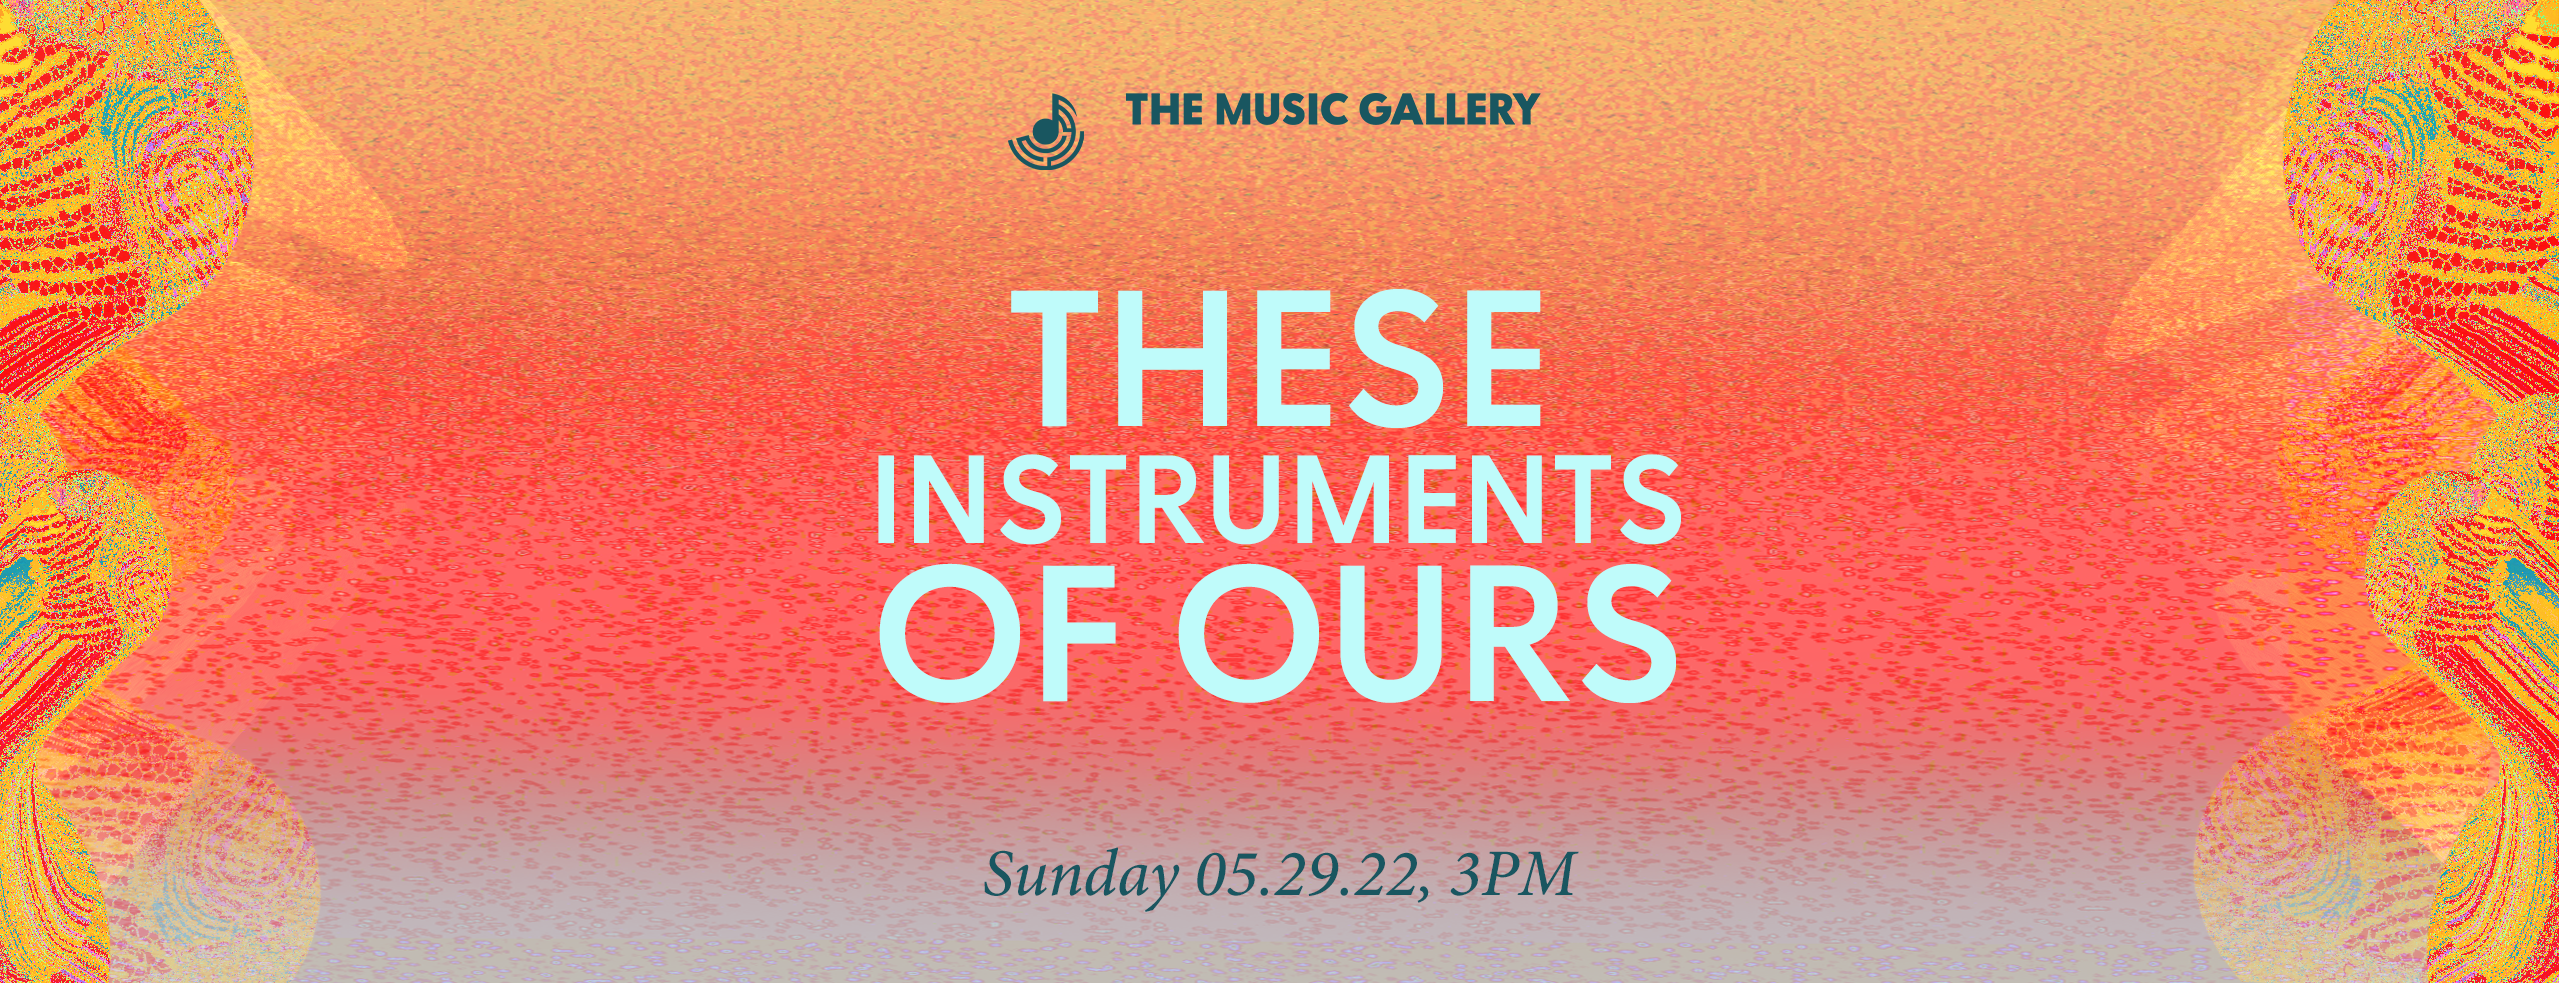 These Instruments are Ours poster